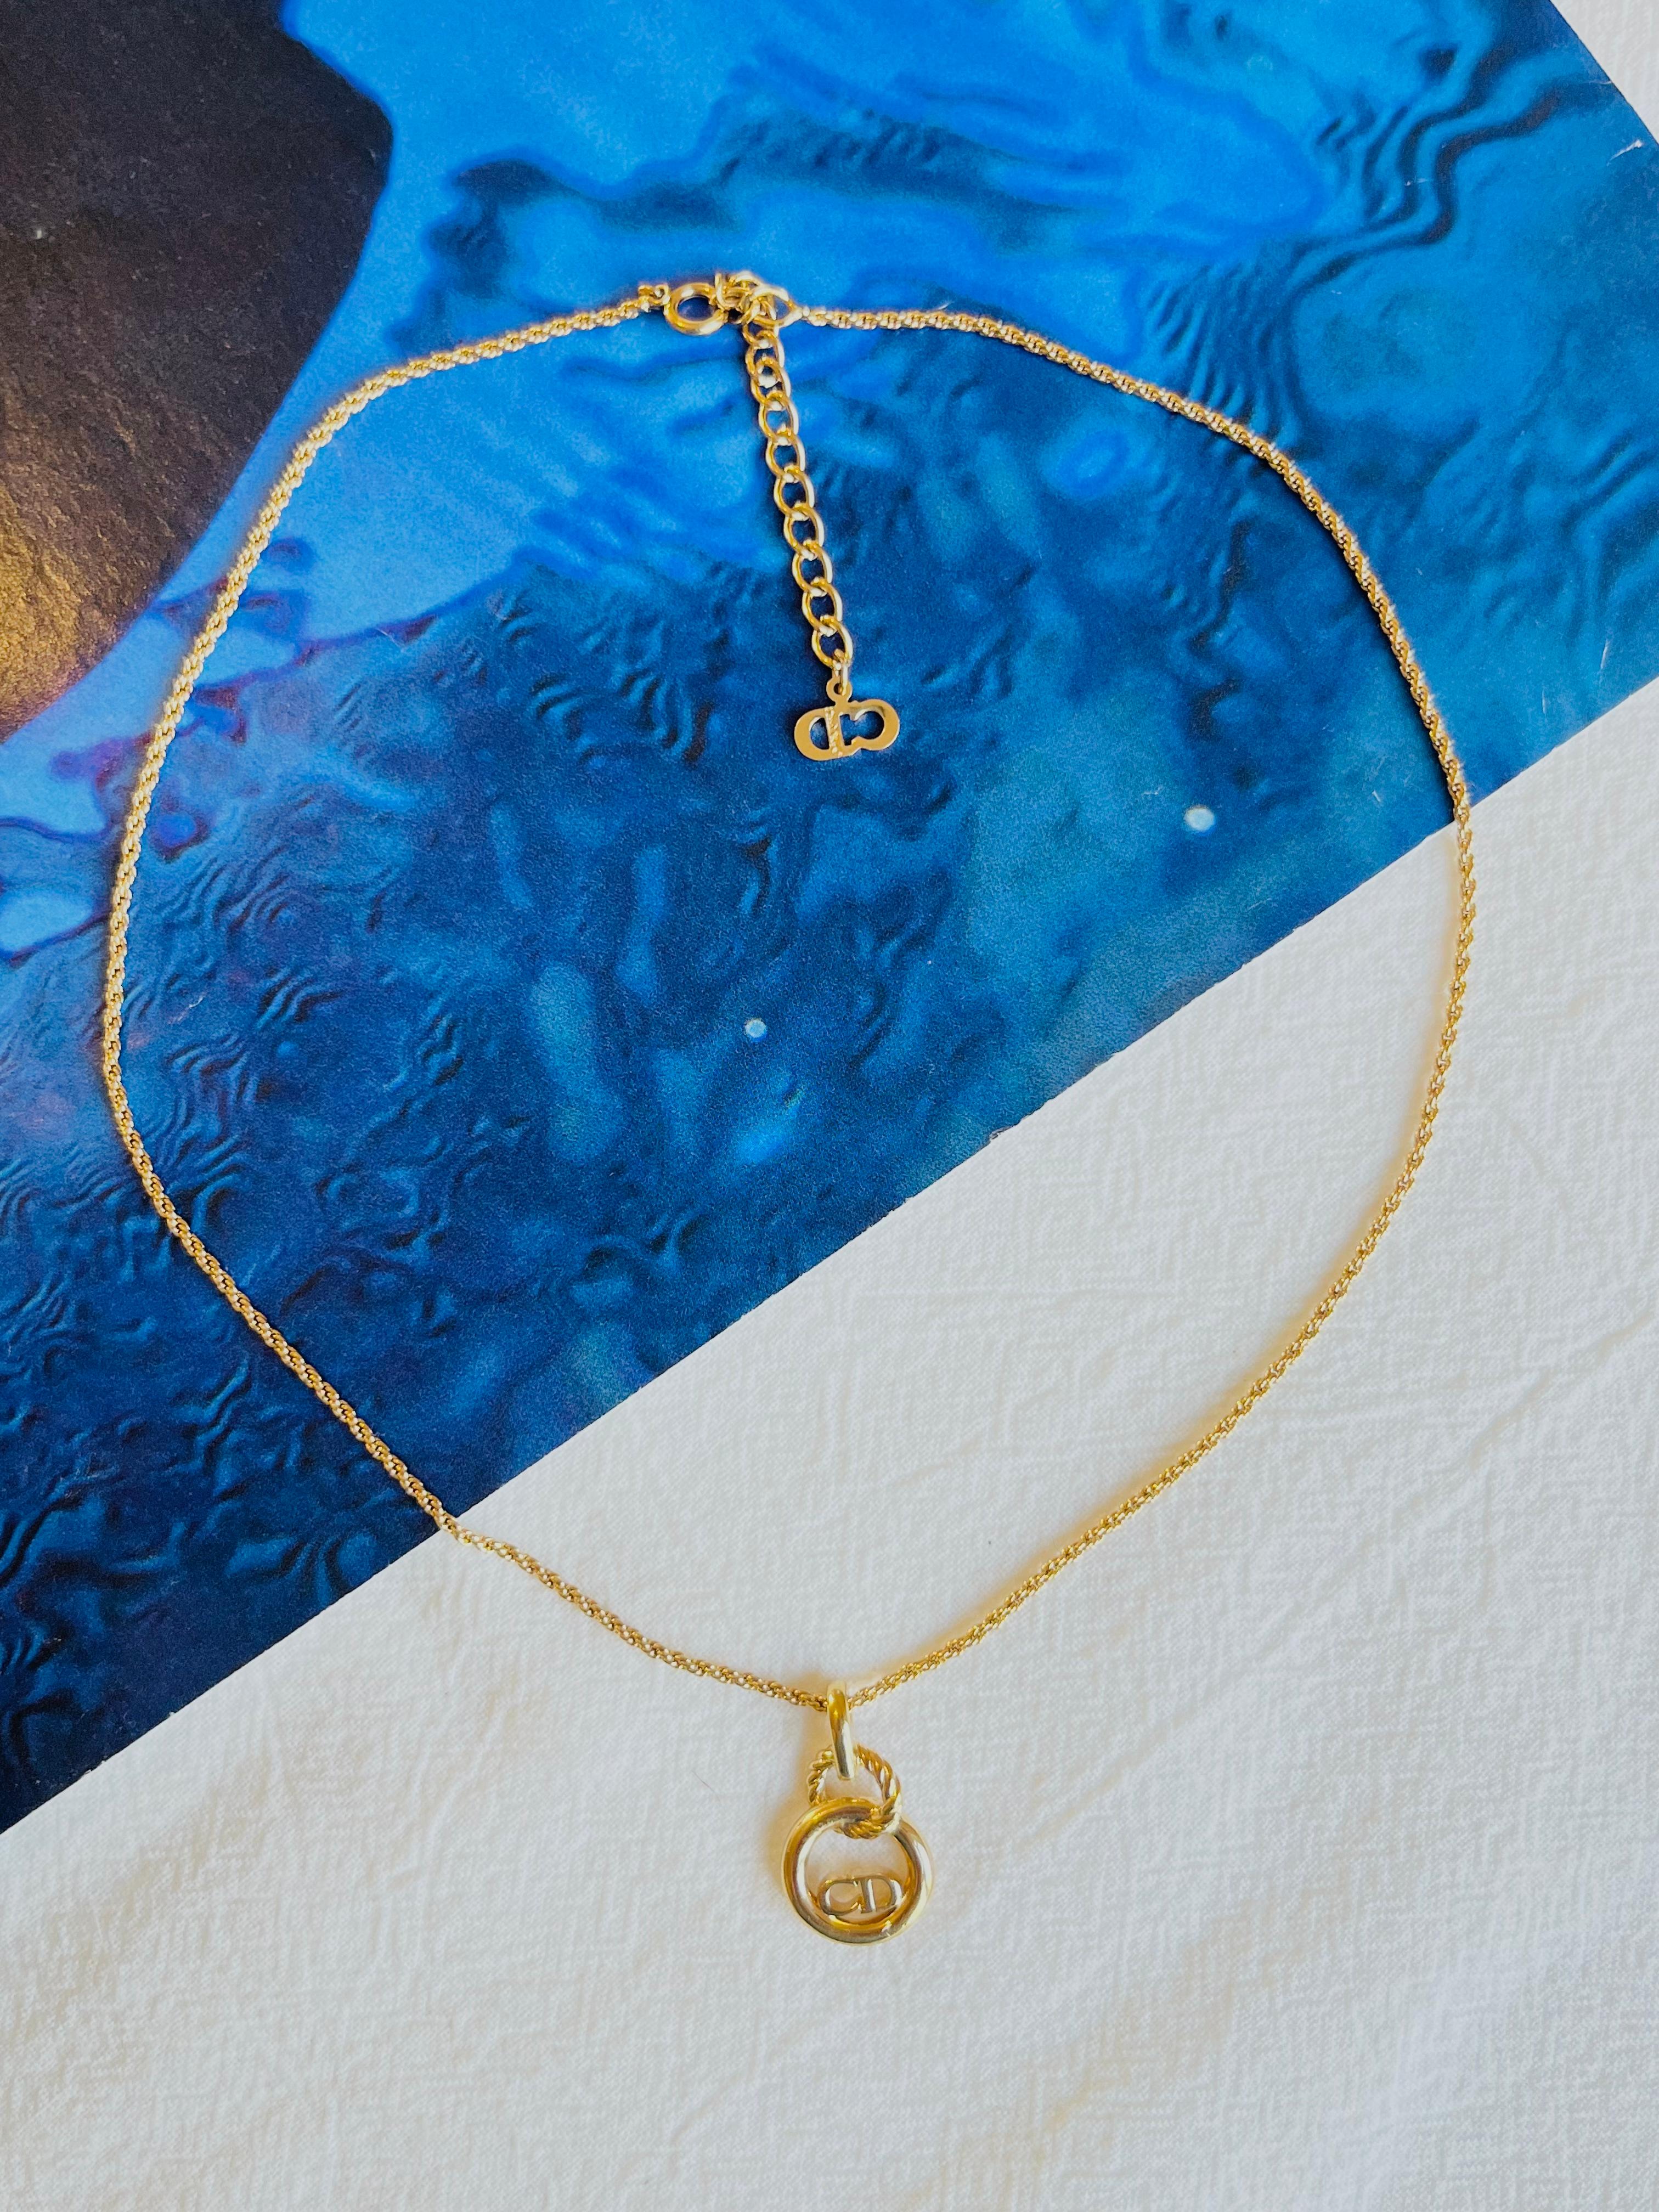 Christian Dior Vintage 1980s CD Logo Monogram Double Interlocked Circle Openwork Pendant Necklace, Gold Plated

Very excellent condition. Marked 'Chr.Dior (C) '. 100% Genuine. 

This is a very stylish and rare piece of jewellery.

Length: 37 cm.